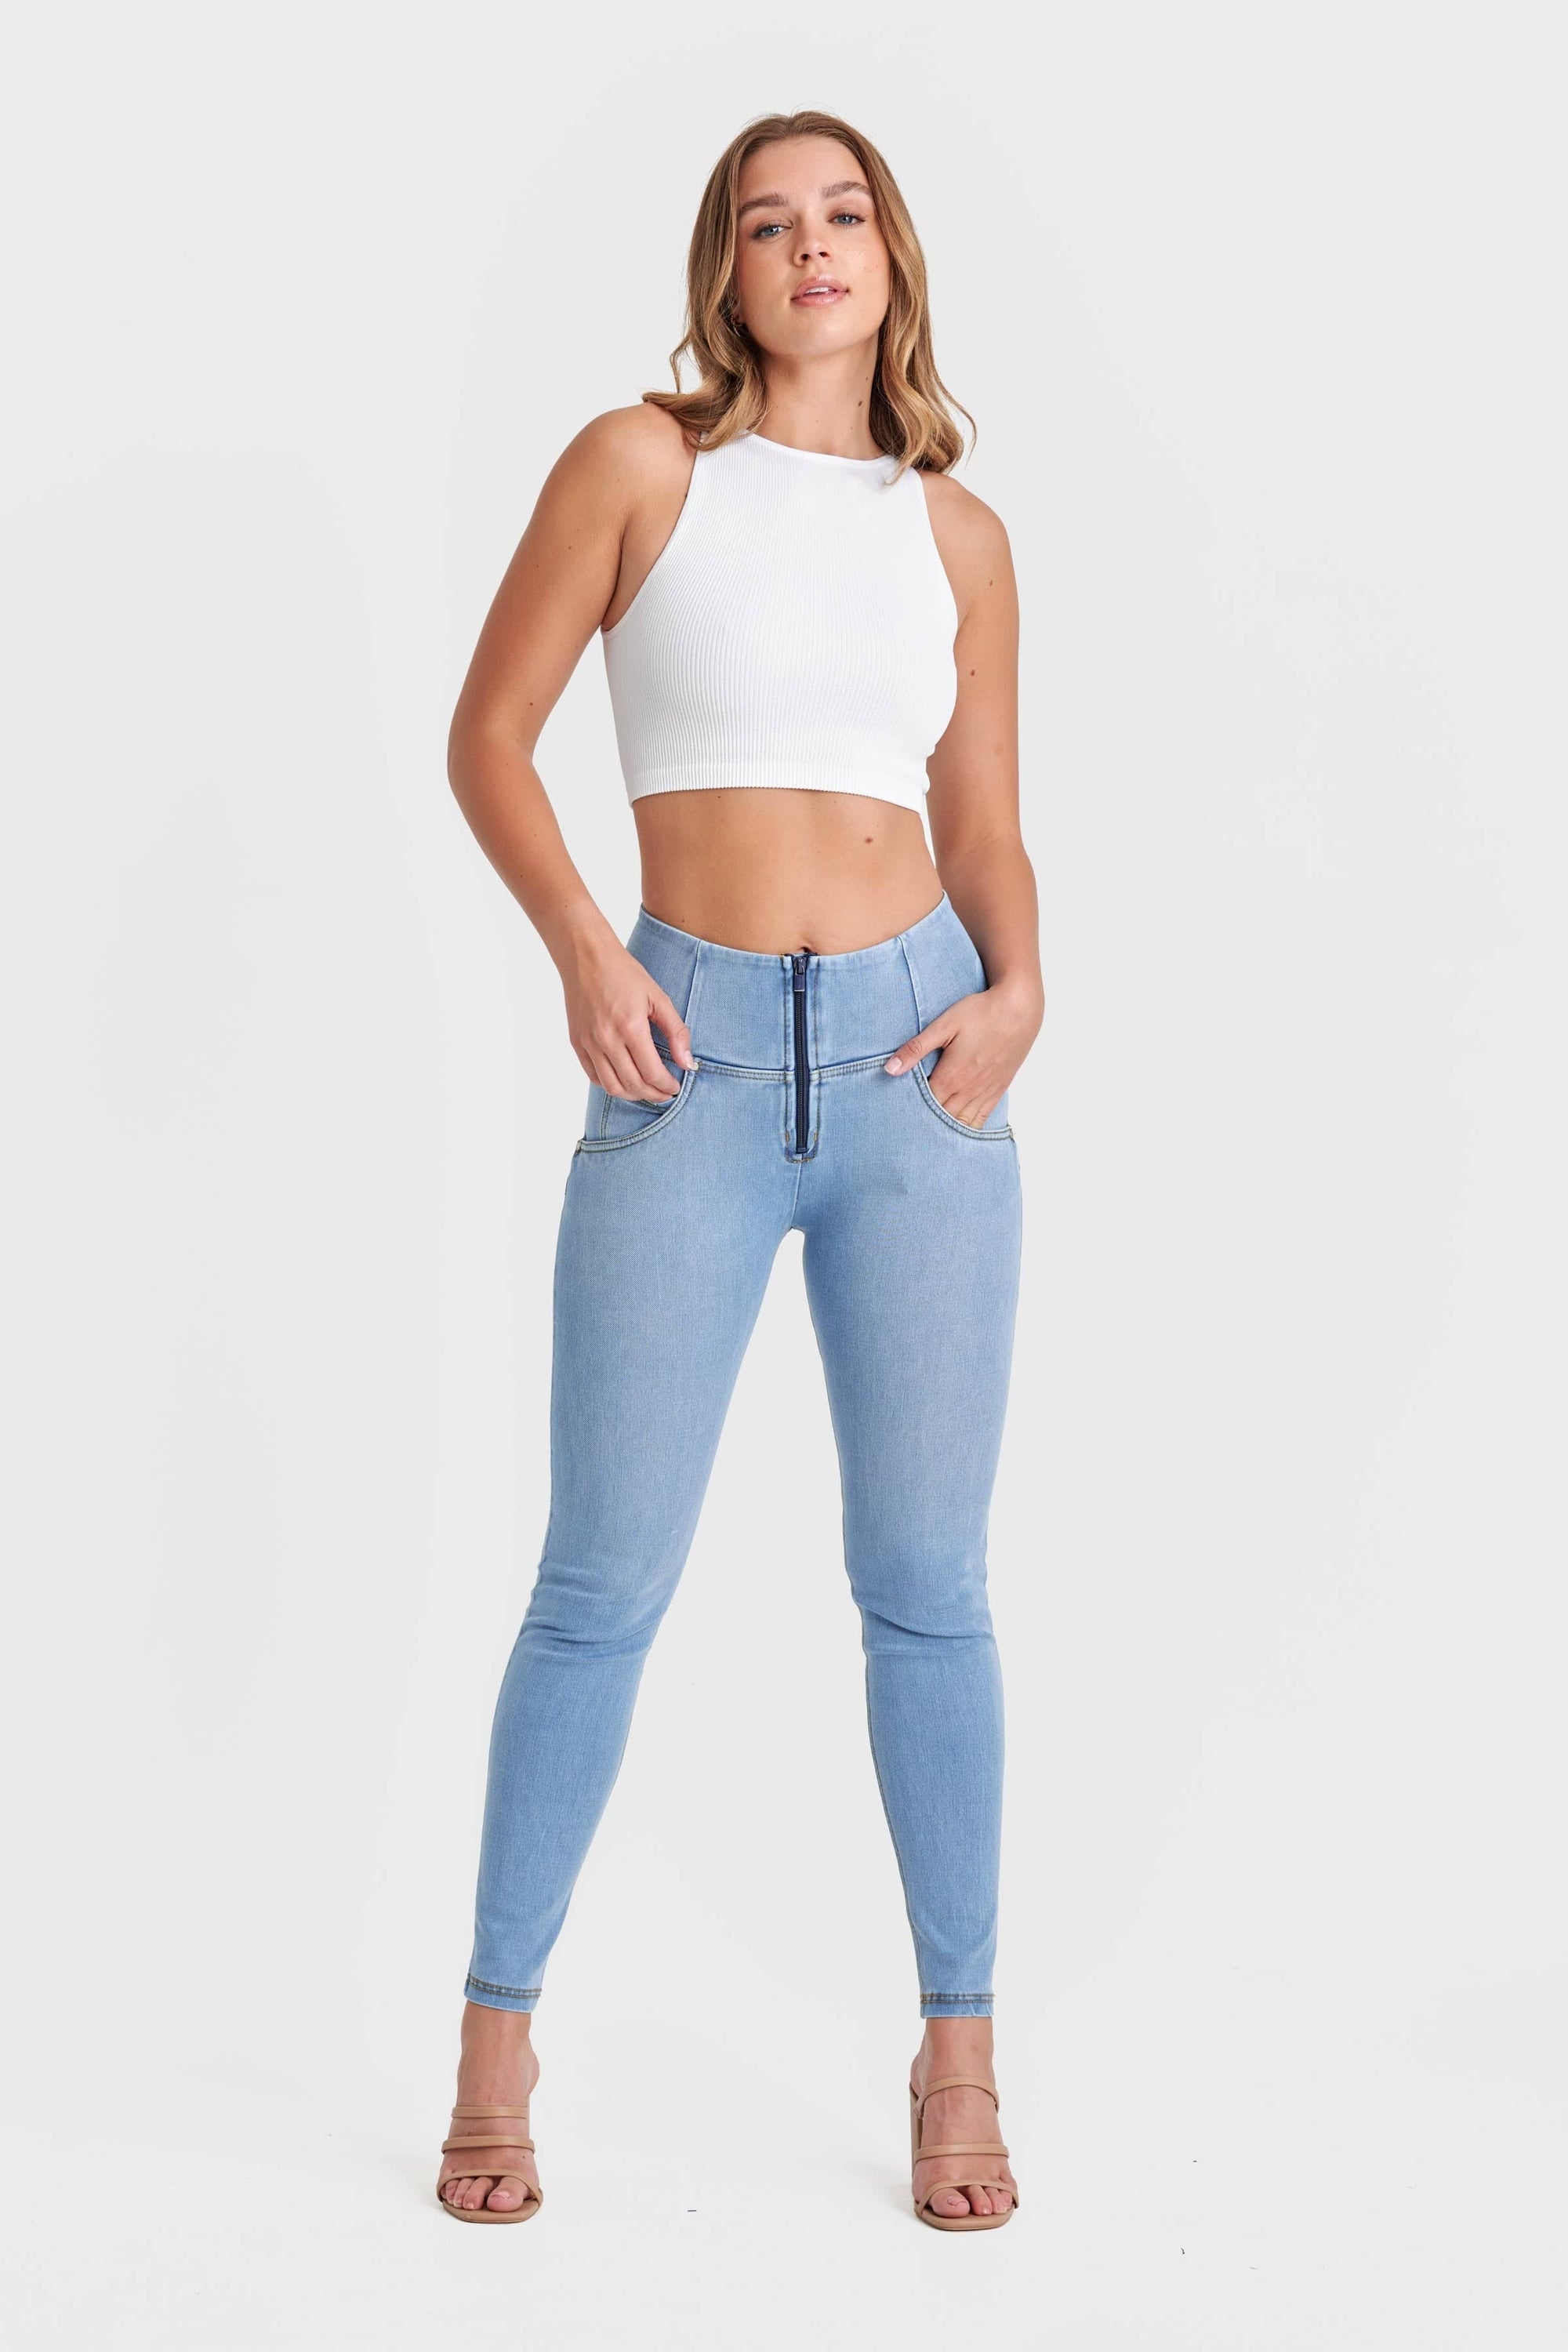 WR.UP® Snug Jeans - High Waisted - Full Length - Light Blue + Yellow Stitching 1